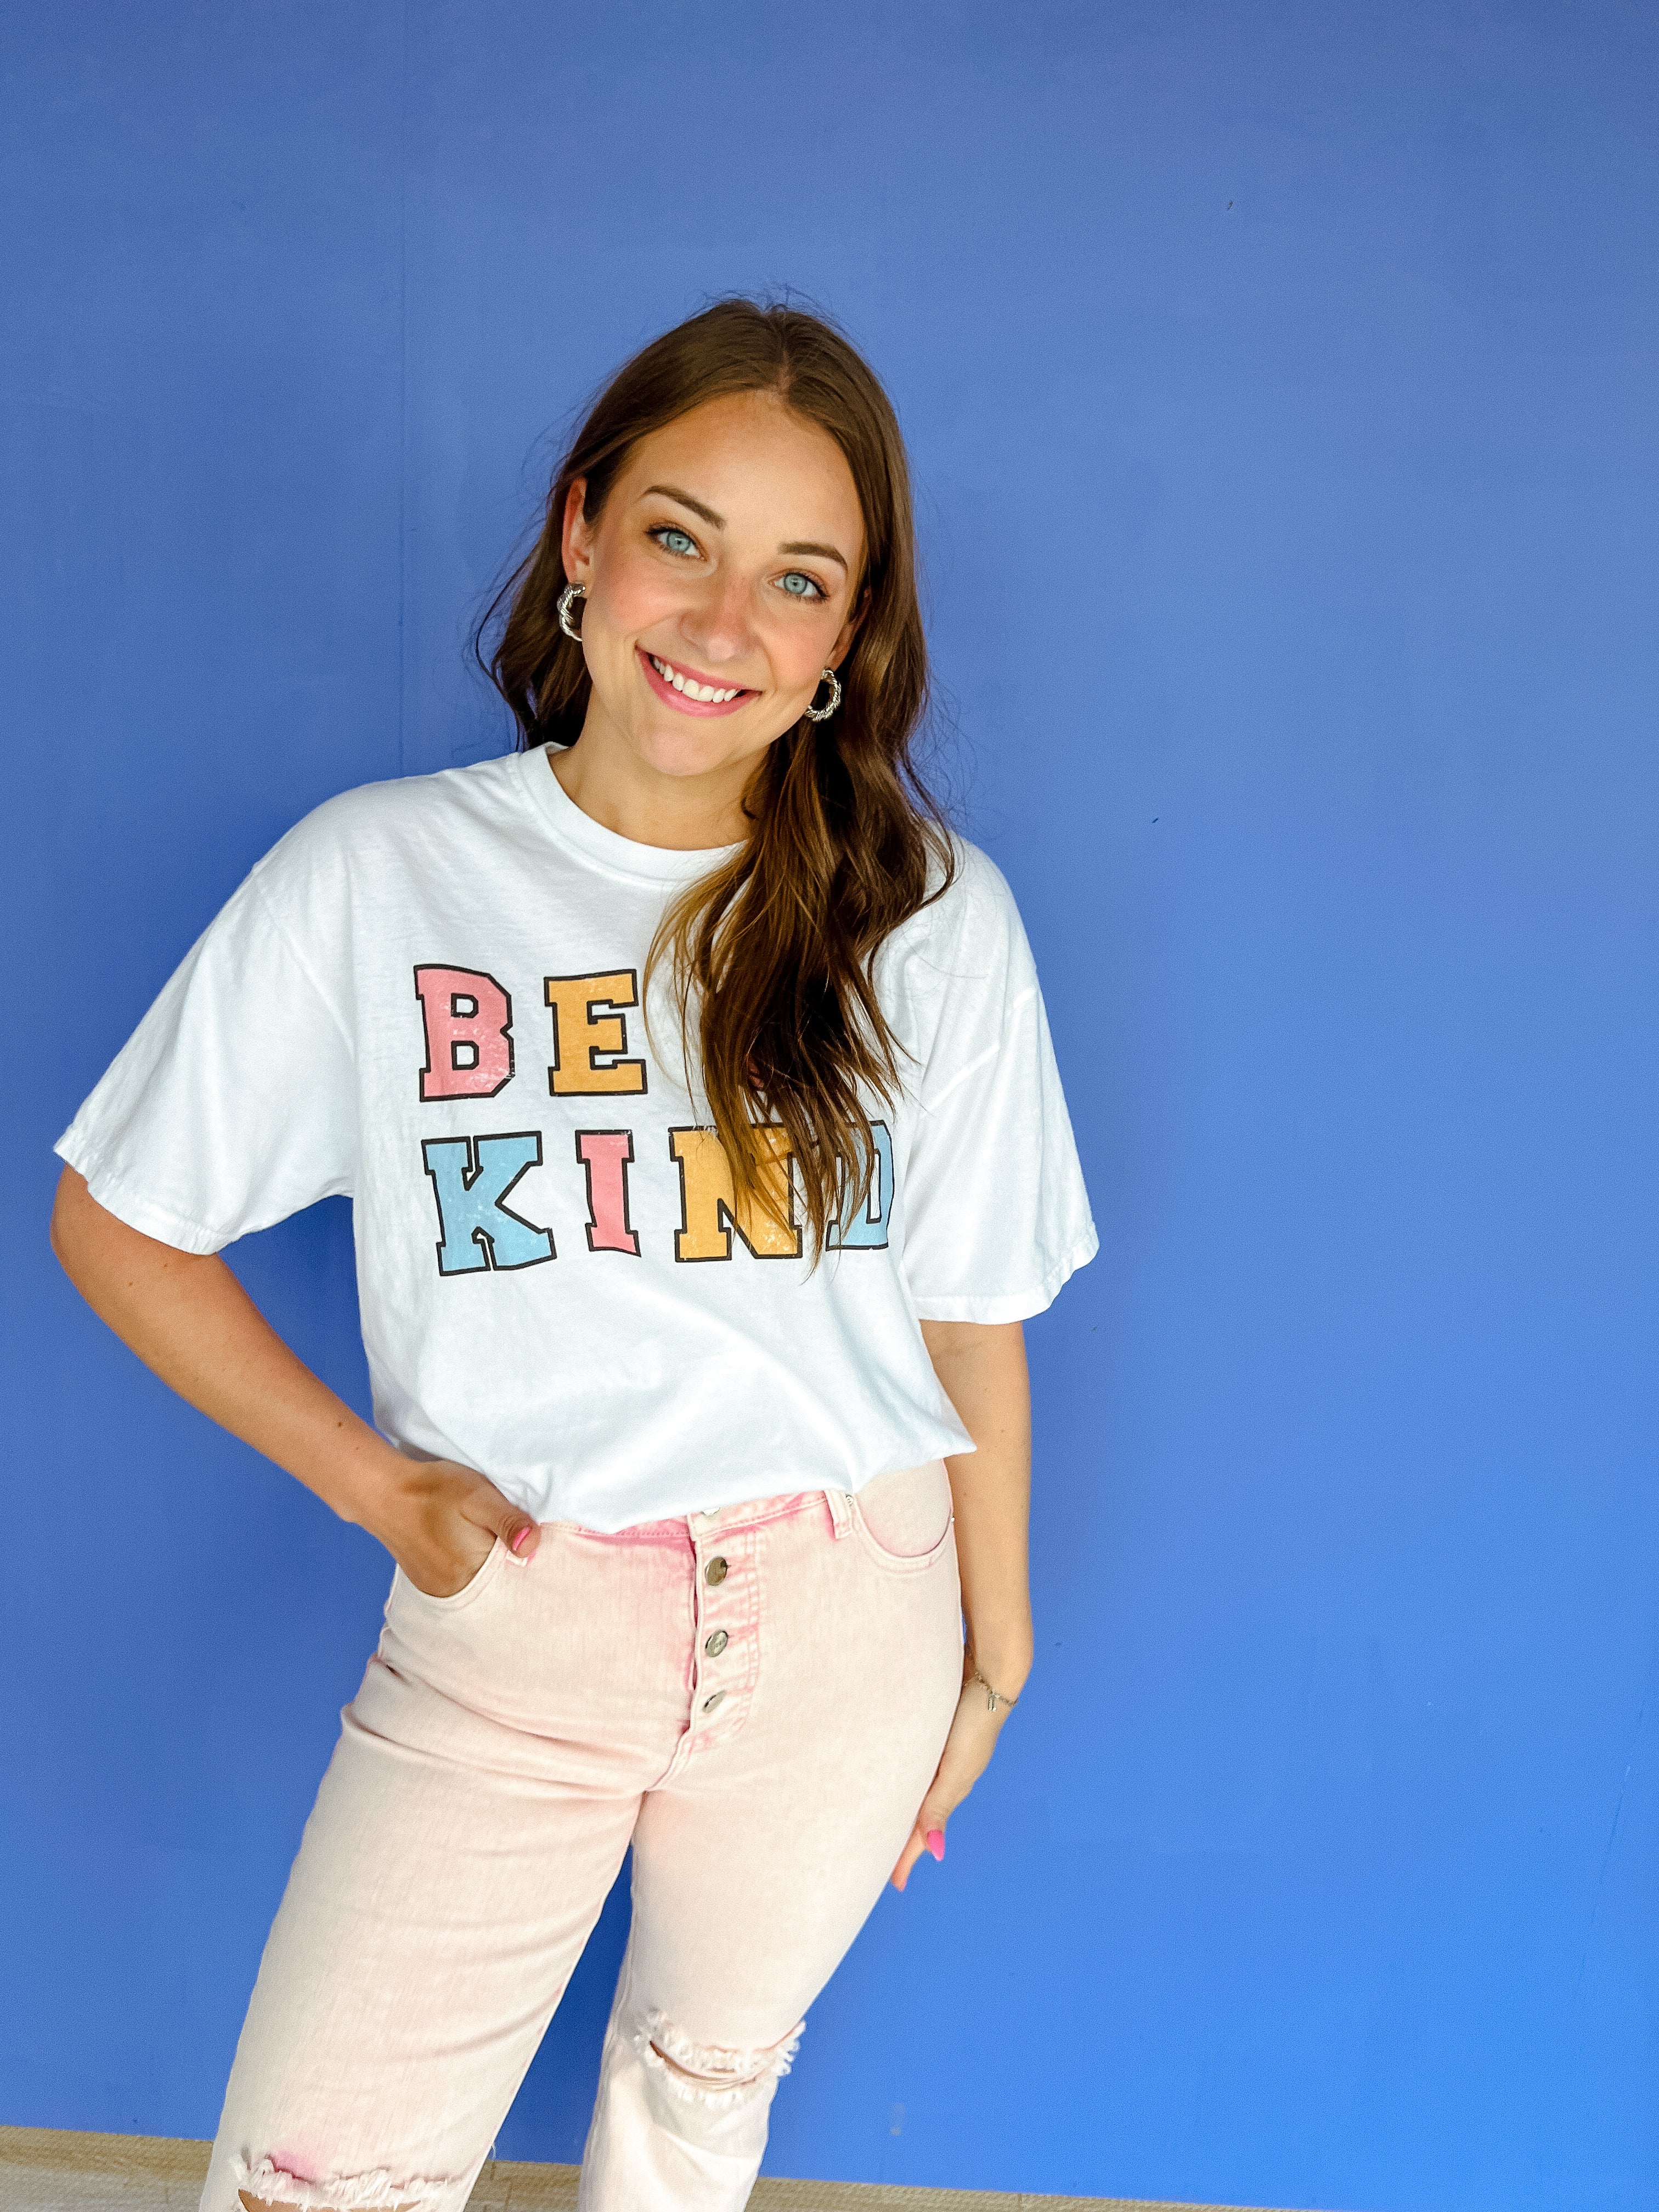 Smile, Be Happy Tee - Cool White